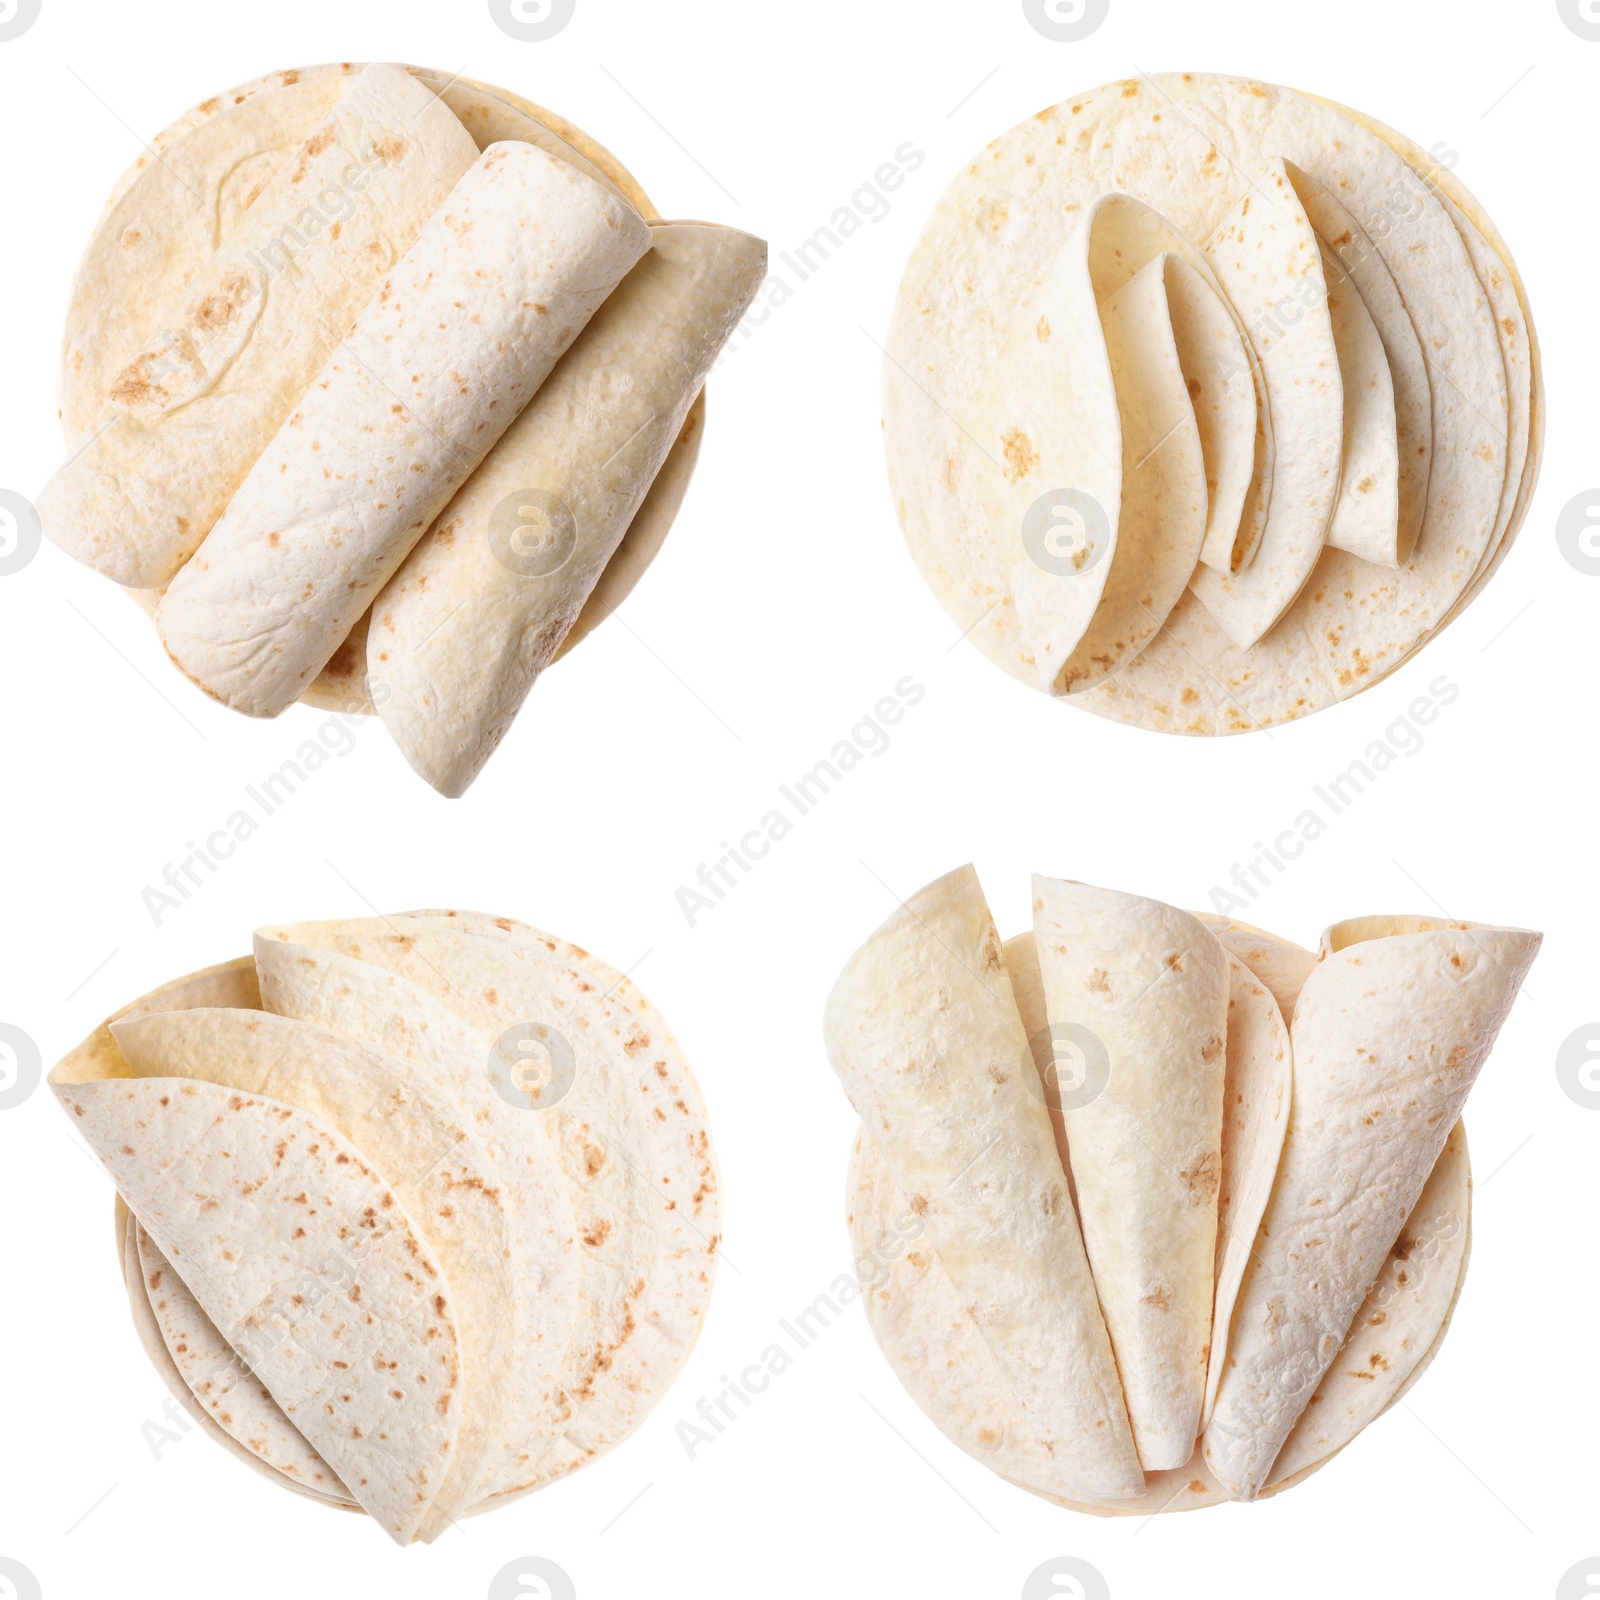 Image of Set of corn tortillas on white background, top view